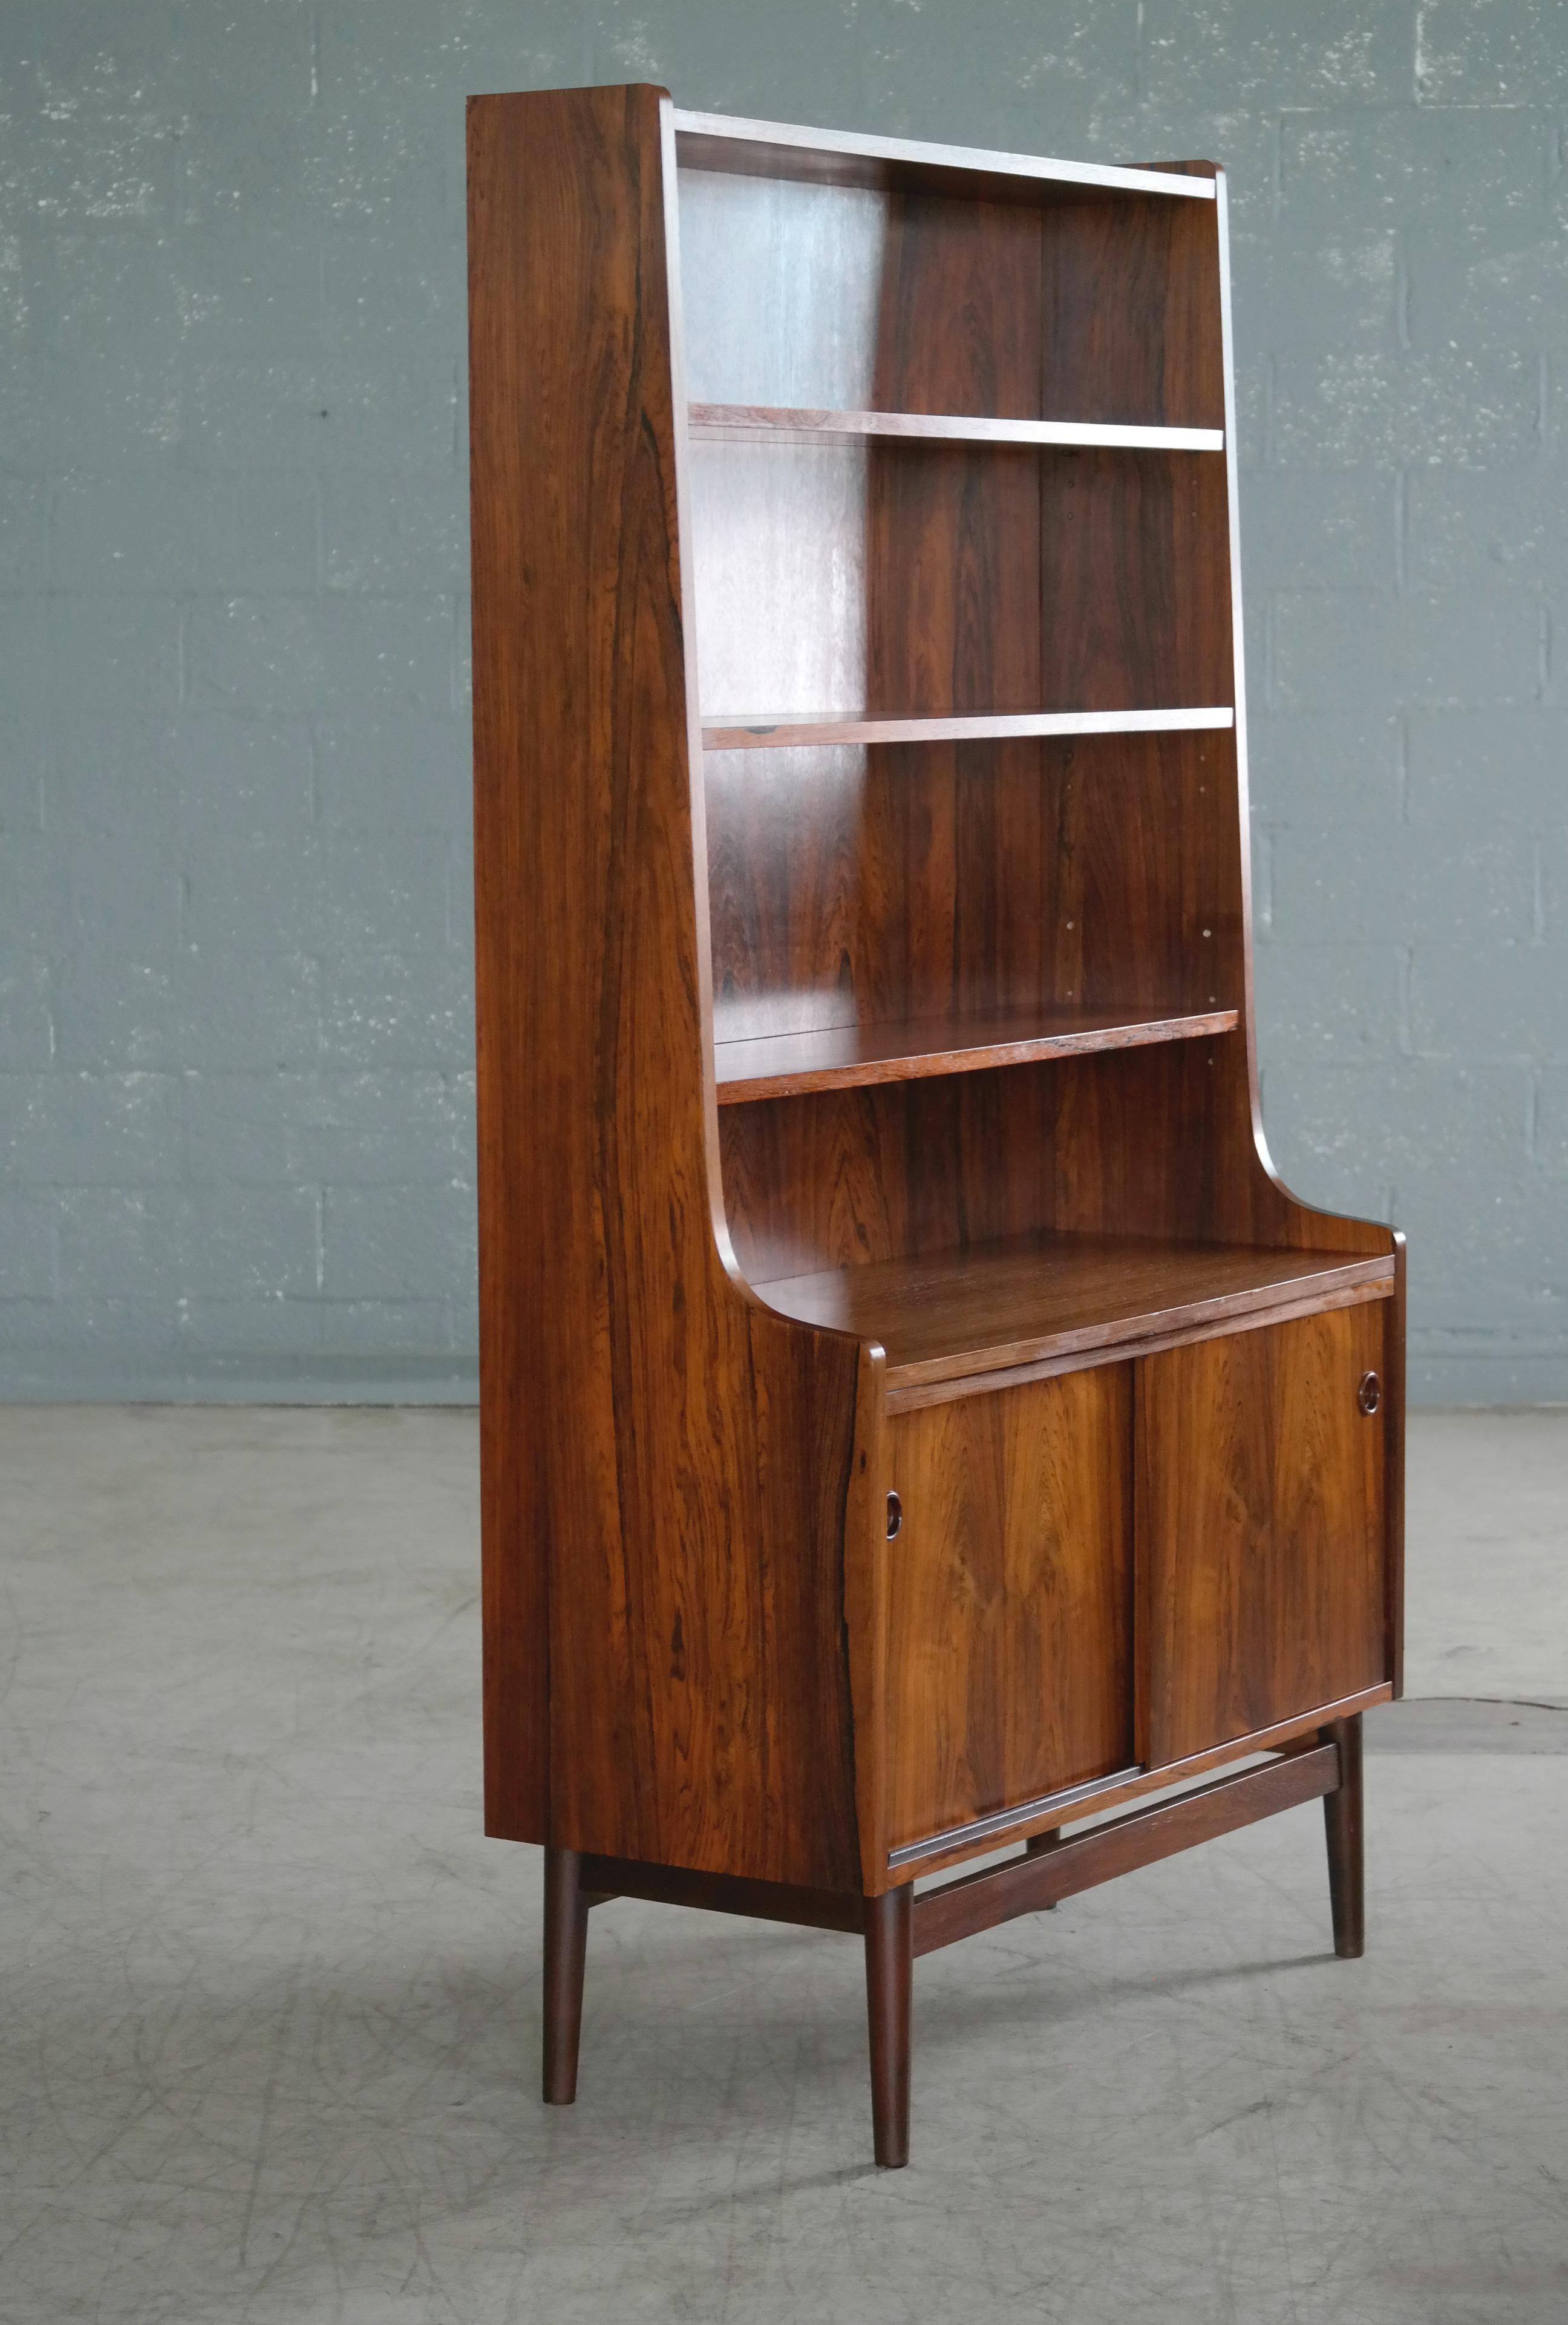 Danish Modern Midcentury Pair of Bookcases in Rosewood by Johannes Sorth 2